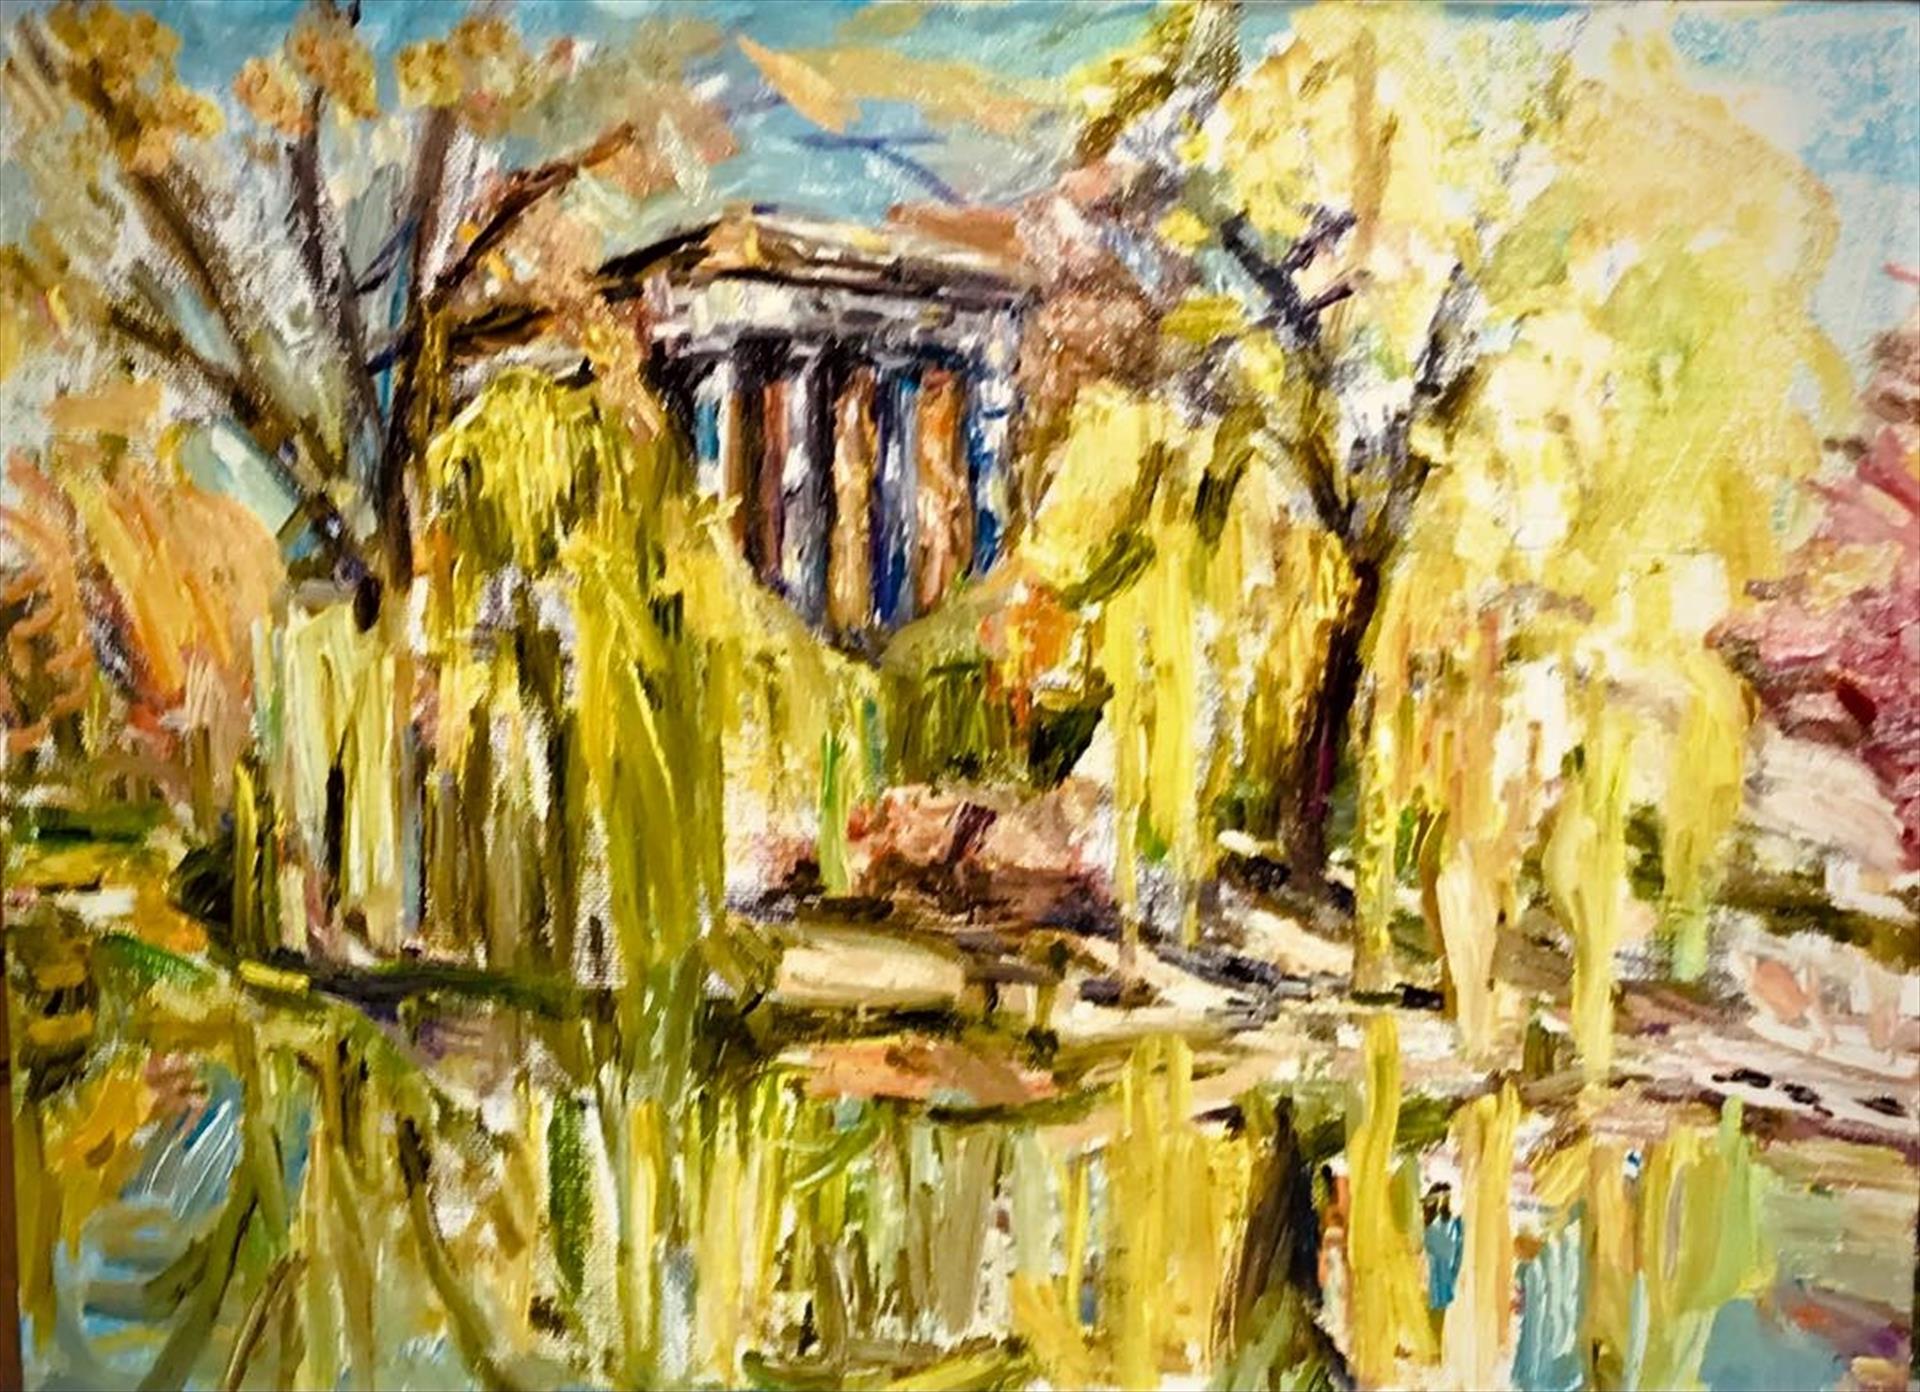 Yelena Patskevich – Willows at Graceland Cemetery Pond